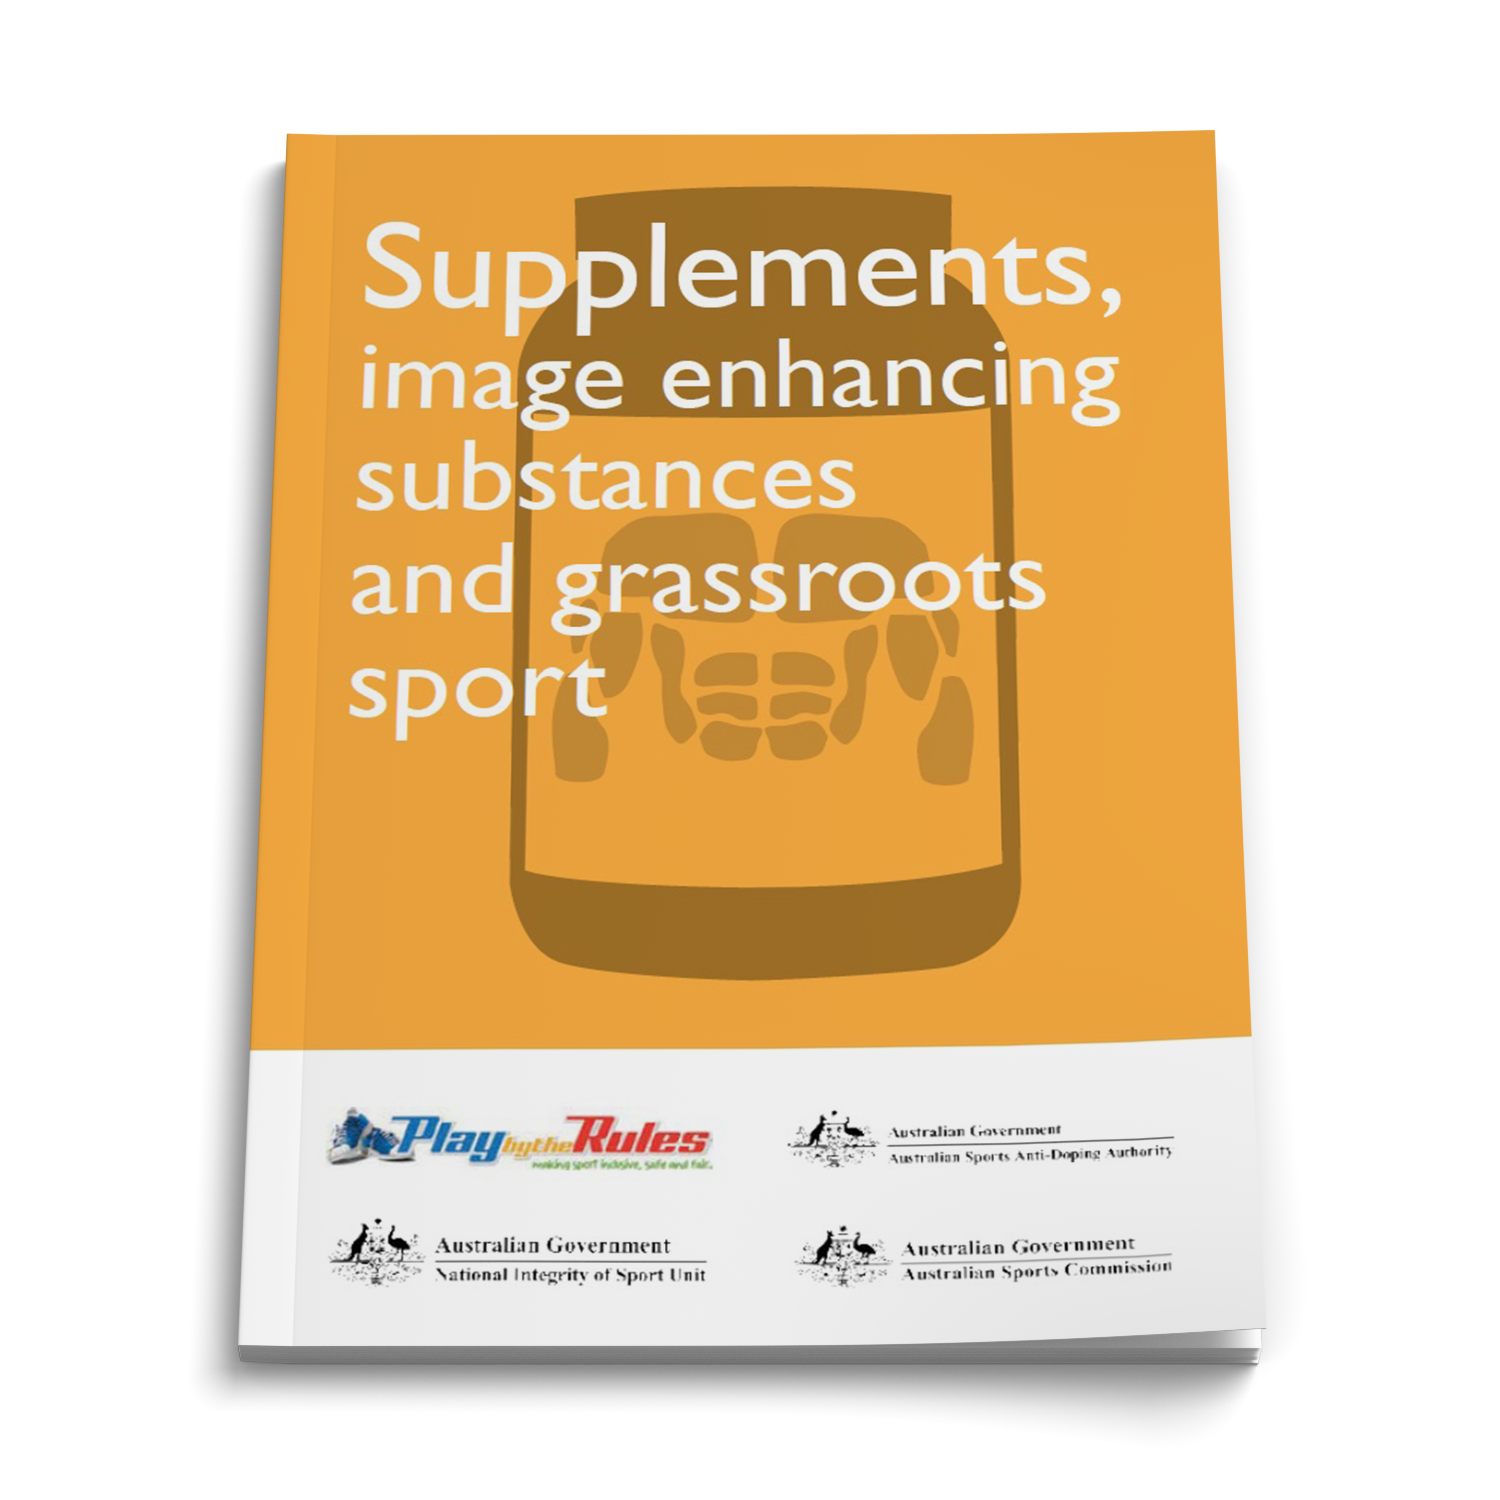 Supplements and image enhancing substances